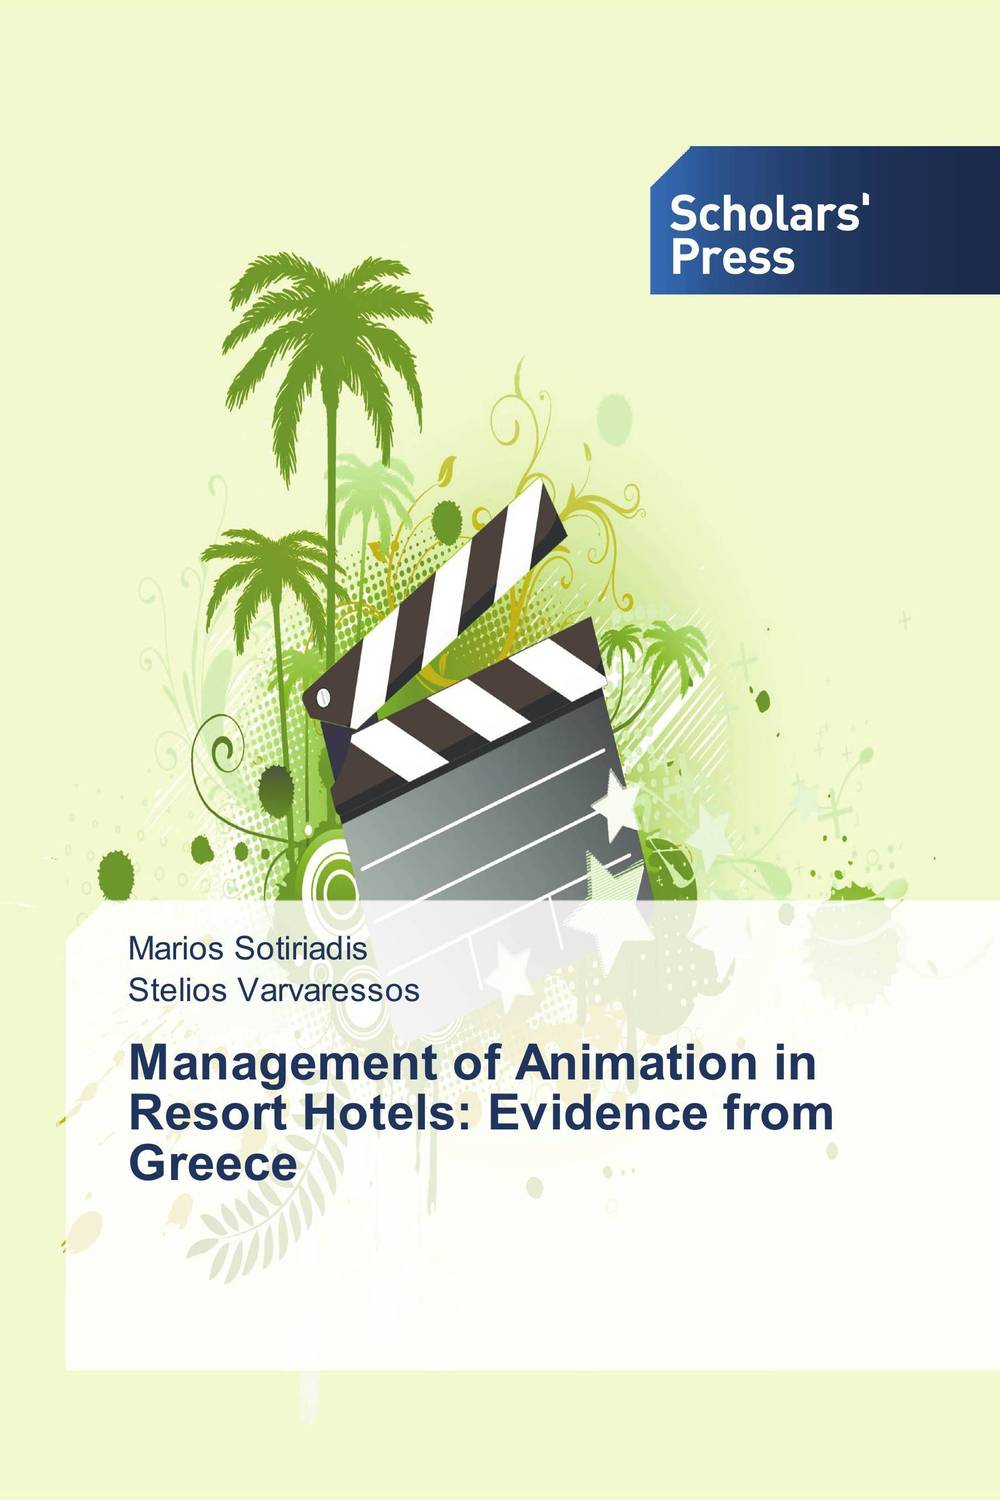 Management of Animation in Resort Hotels: Evidence from Greece